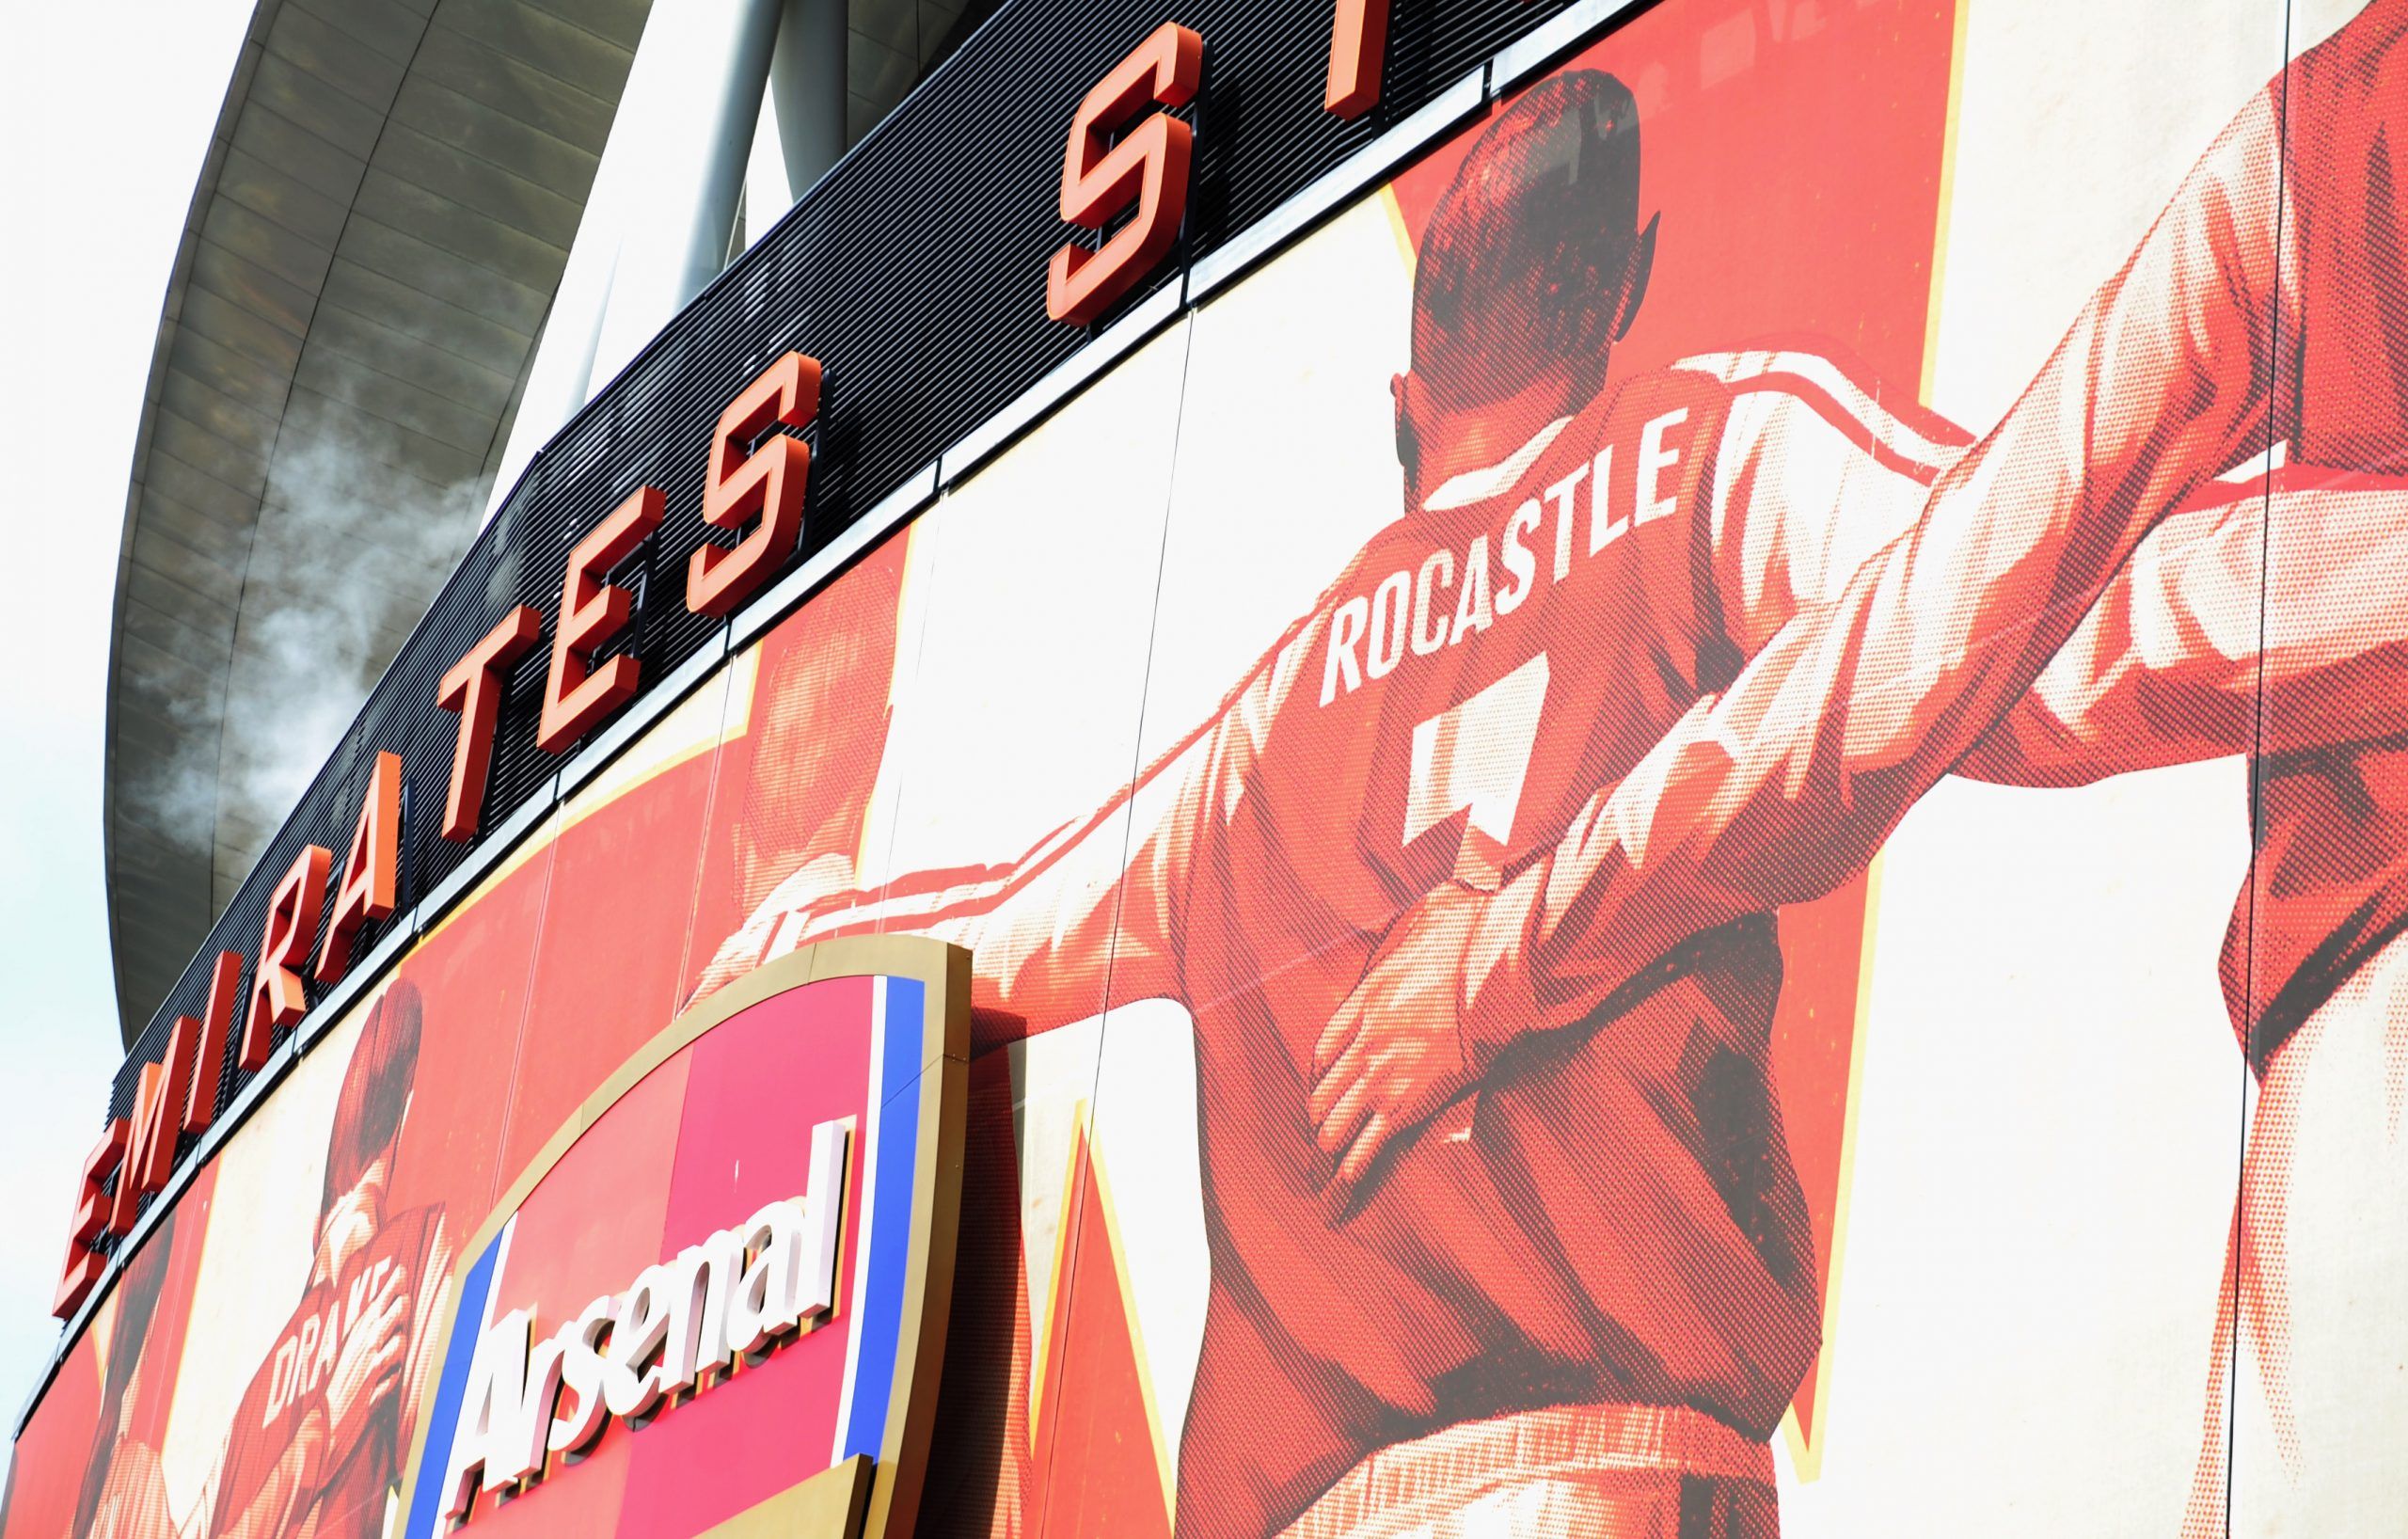 LONDON, ENGLAND - MARCH 30: An image of former Arsenal player David Rocastle is seen on the stadium prior to the Barclays Premier League match between Arsenal and Reading at Emirates Stadium on March 30, 2013 in London, England. David Rocastle died on March 31st 2001 aged 33. (Photo by Jamie McDonald/Getty Images)